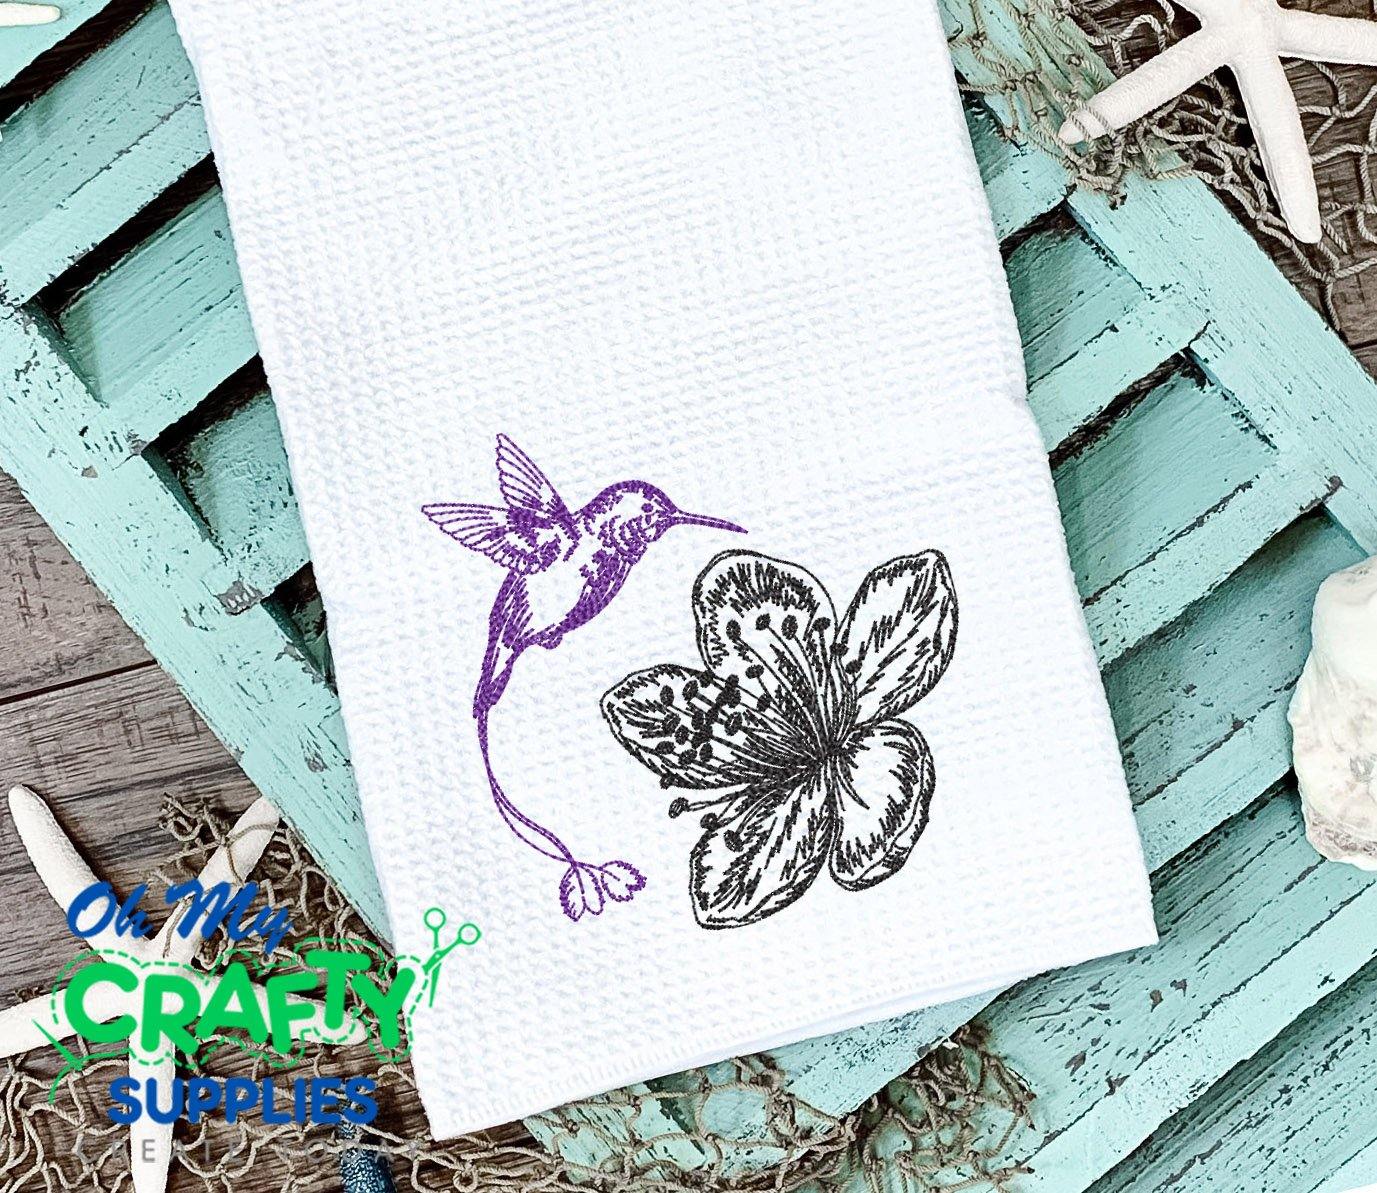 Sketch Humming Bird 2021 Embroidery Design - Oh My Crafty Supplies Inc.